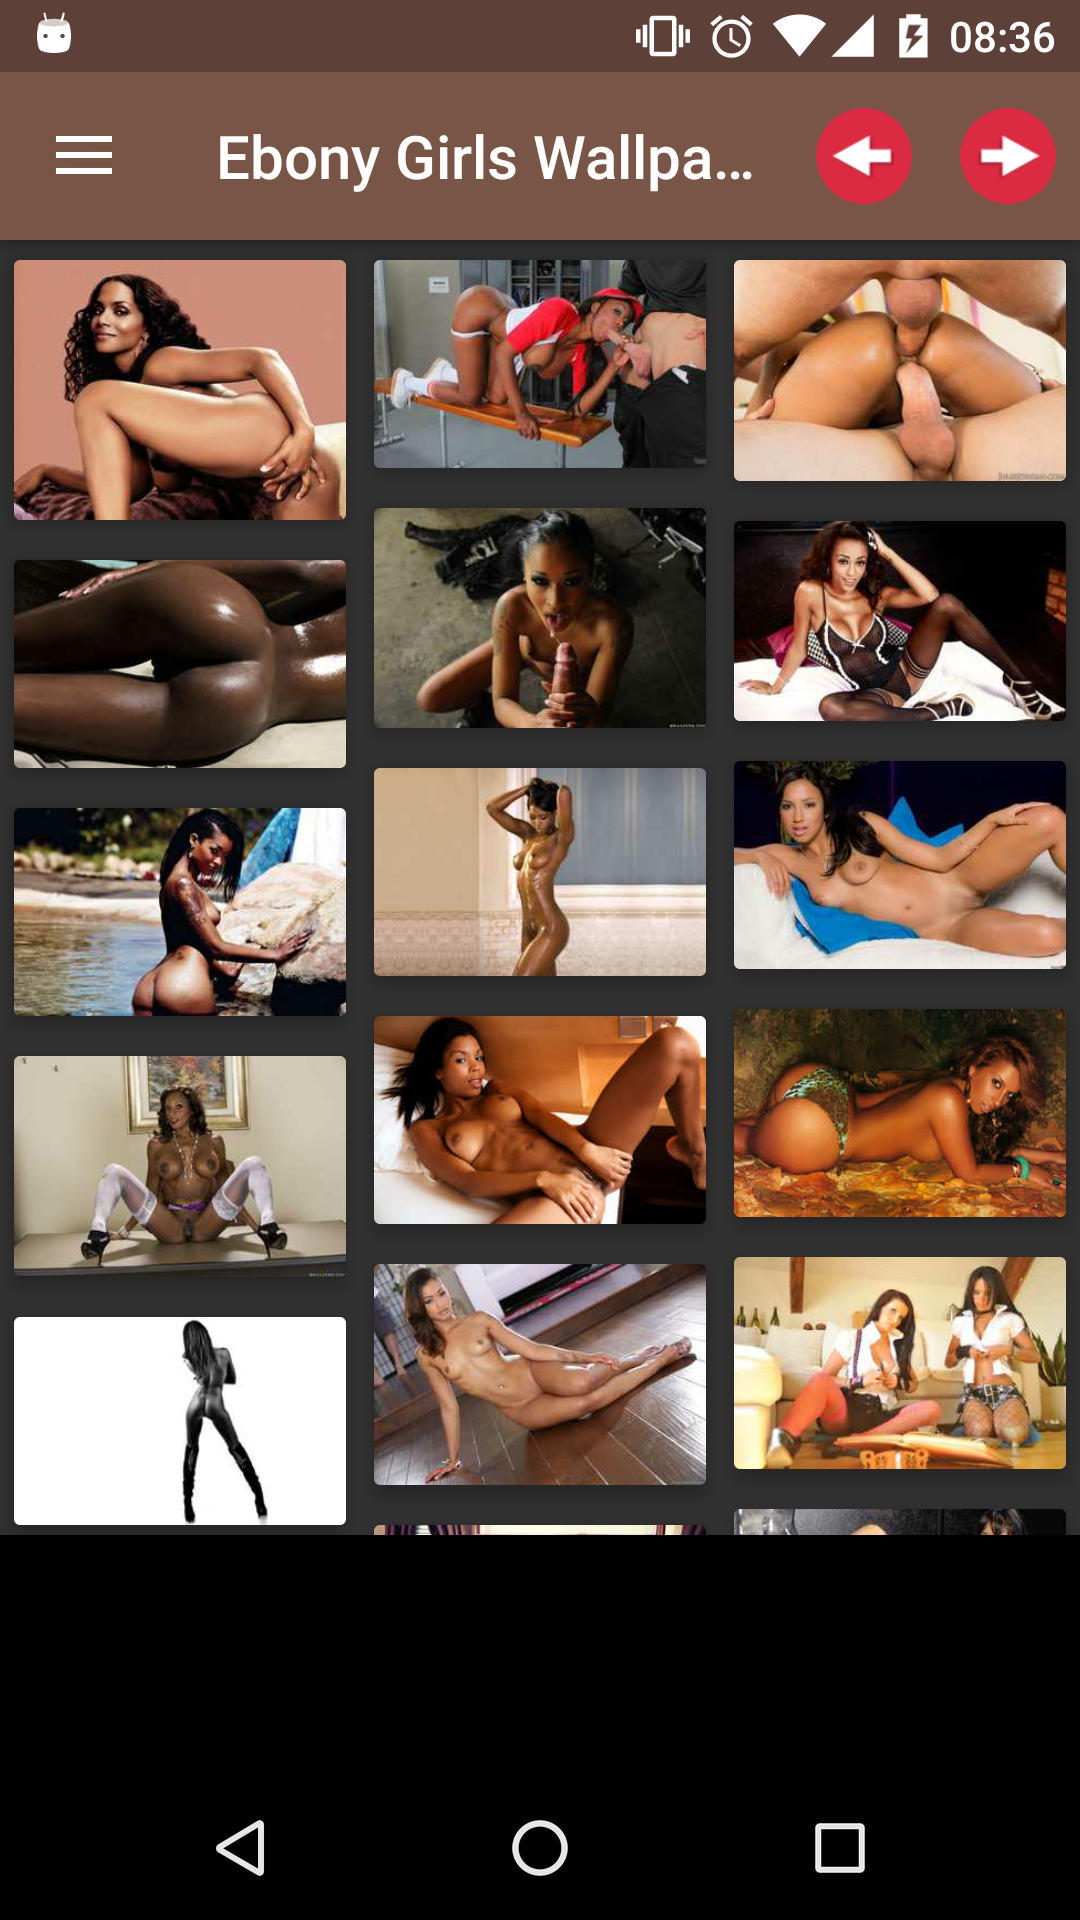 Ebony Girls Wallpapers collection,list,black,lane,gloryhole,pics,anime,pic,photos,app,wallpapers,pictures,image,porn,pornstars,lily,apk,store,hentai,picd,rated,hentie,galleries,ebony,sexy